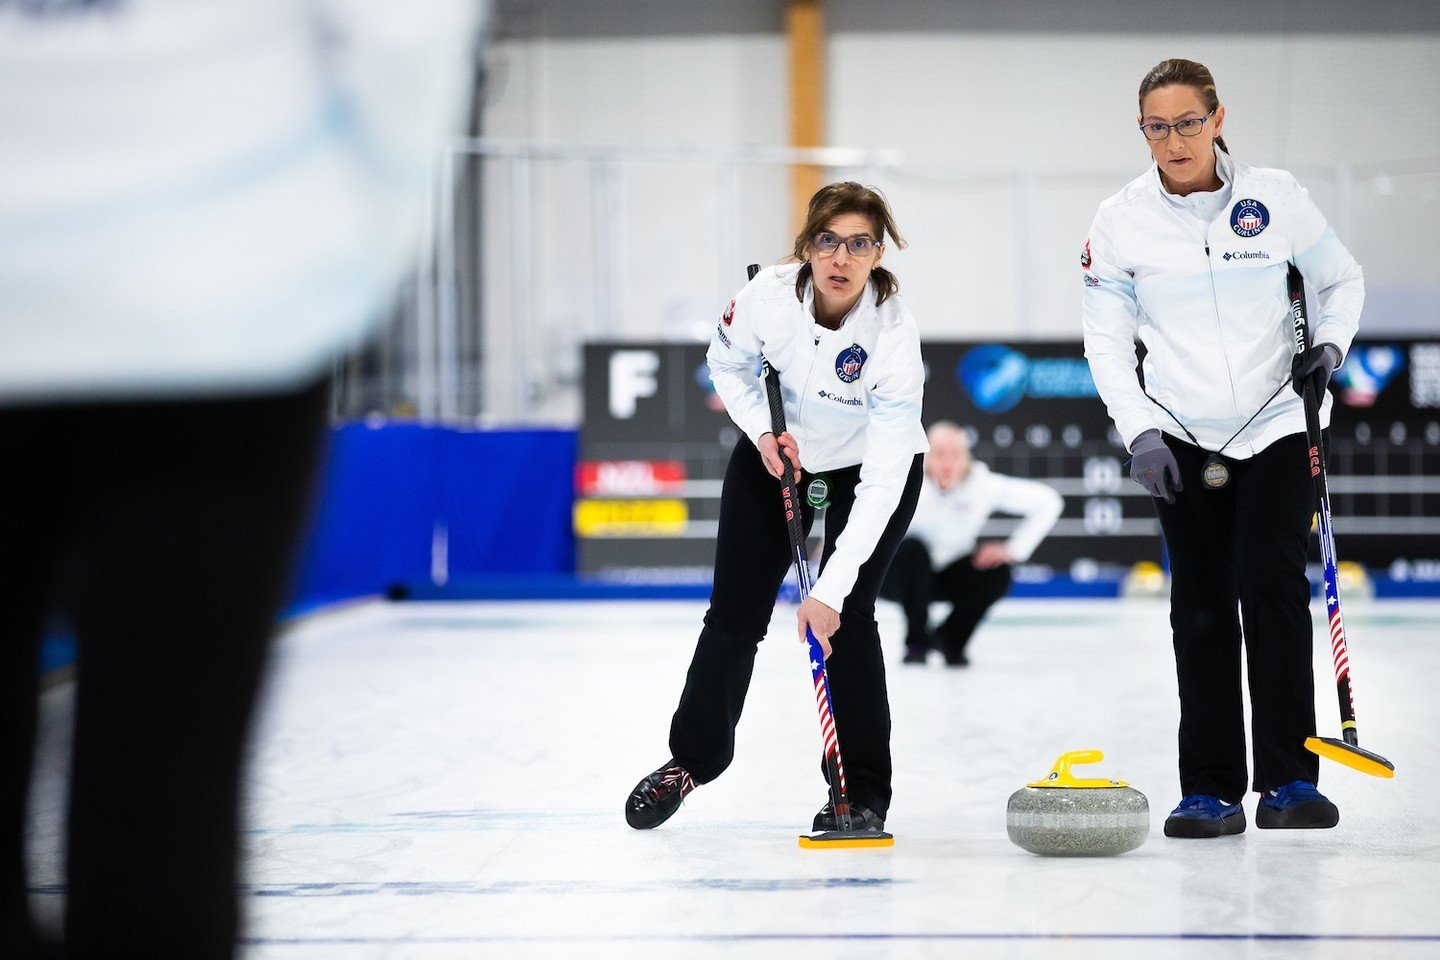 At their first event representing the United States on the world stage, Team Montgomery faced fierce competition at the World Senior Women's Championship. We're proud of their efforts and sportsmanship throughout the event.
📸 WCF / Stephen Fisher &a